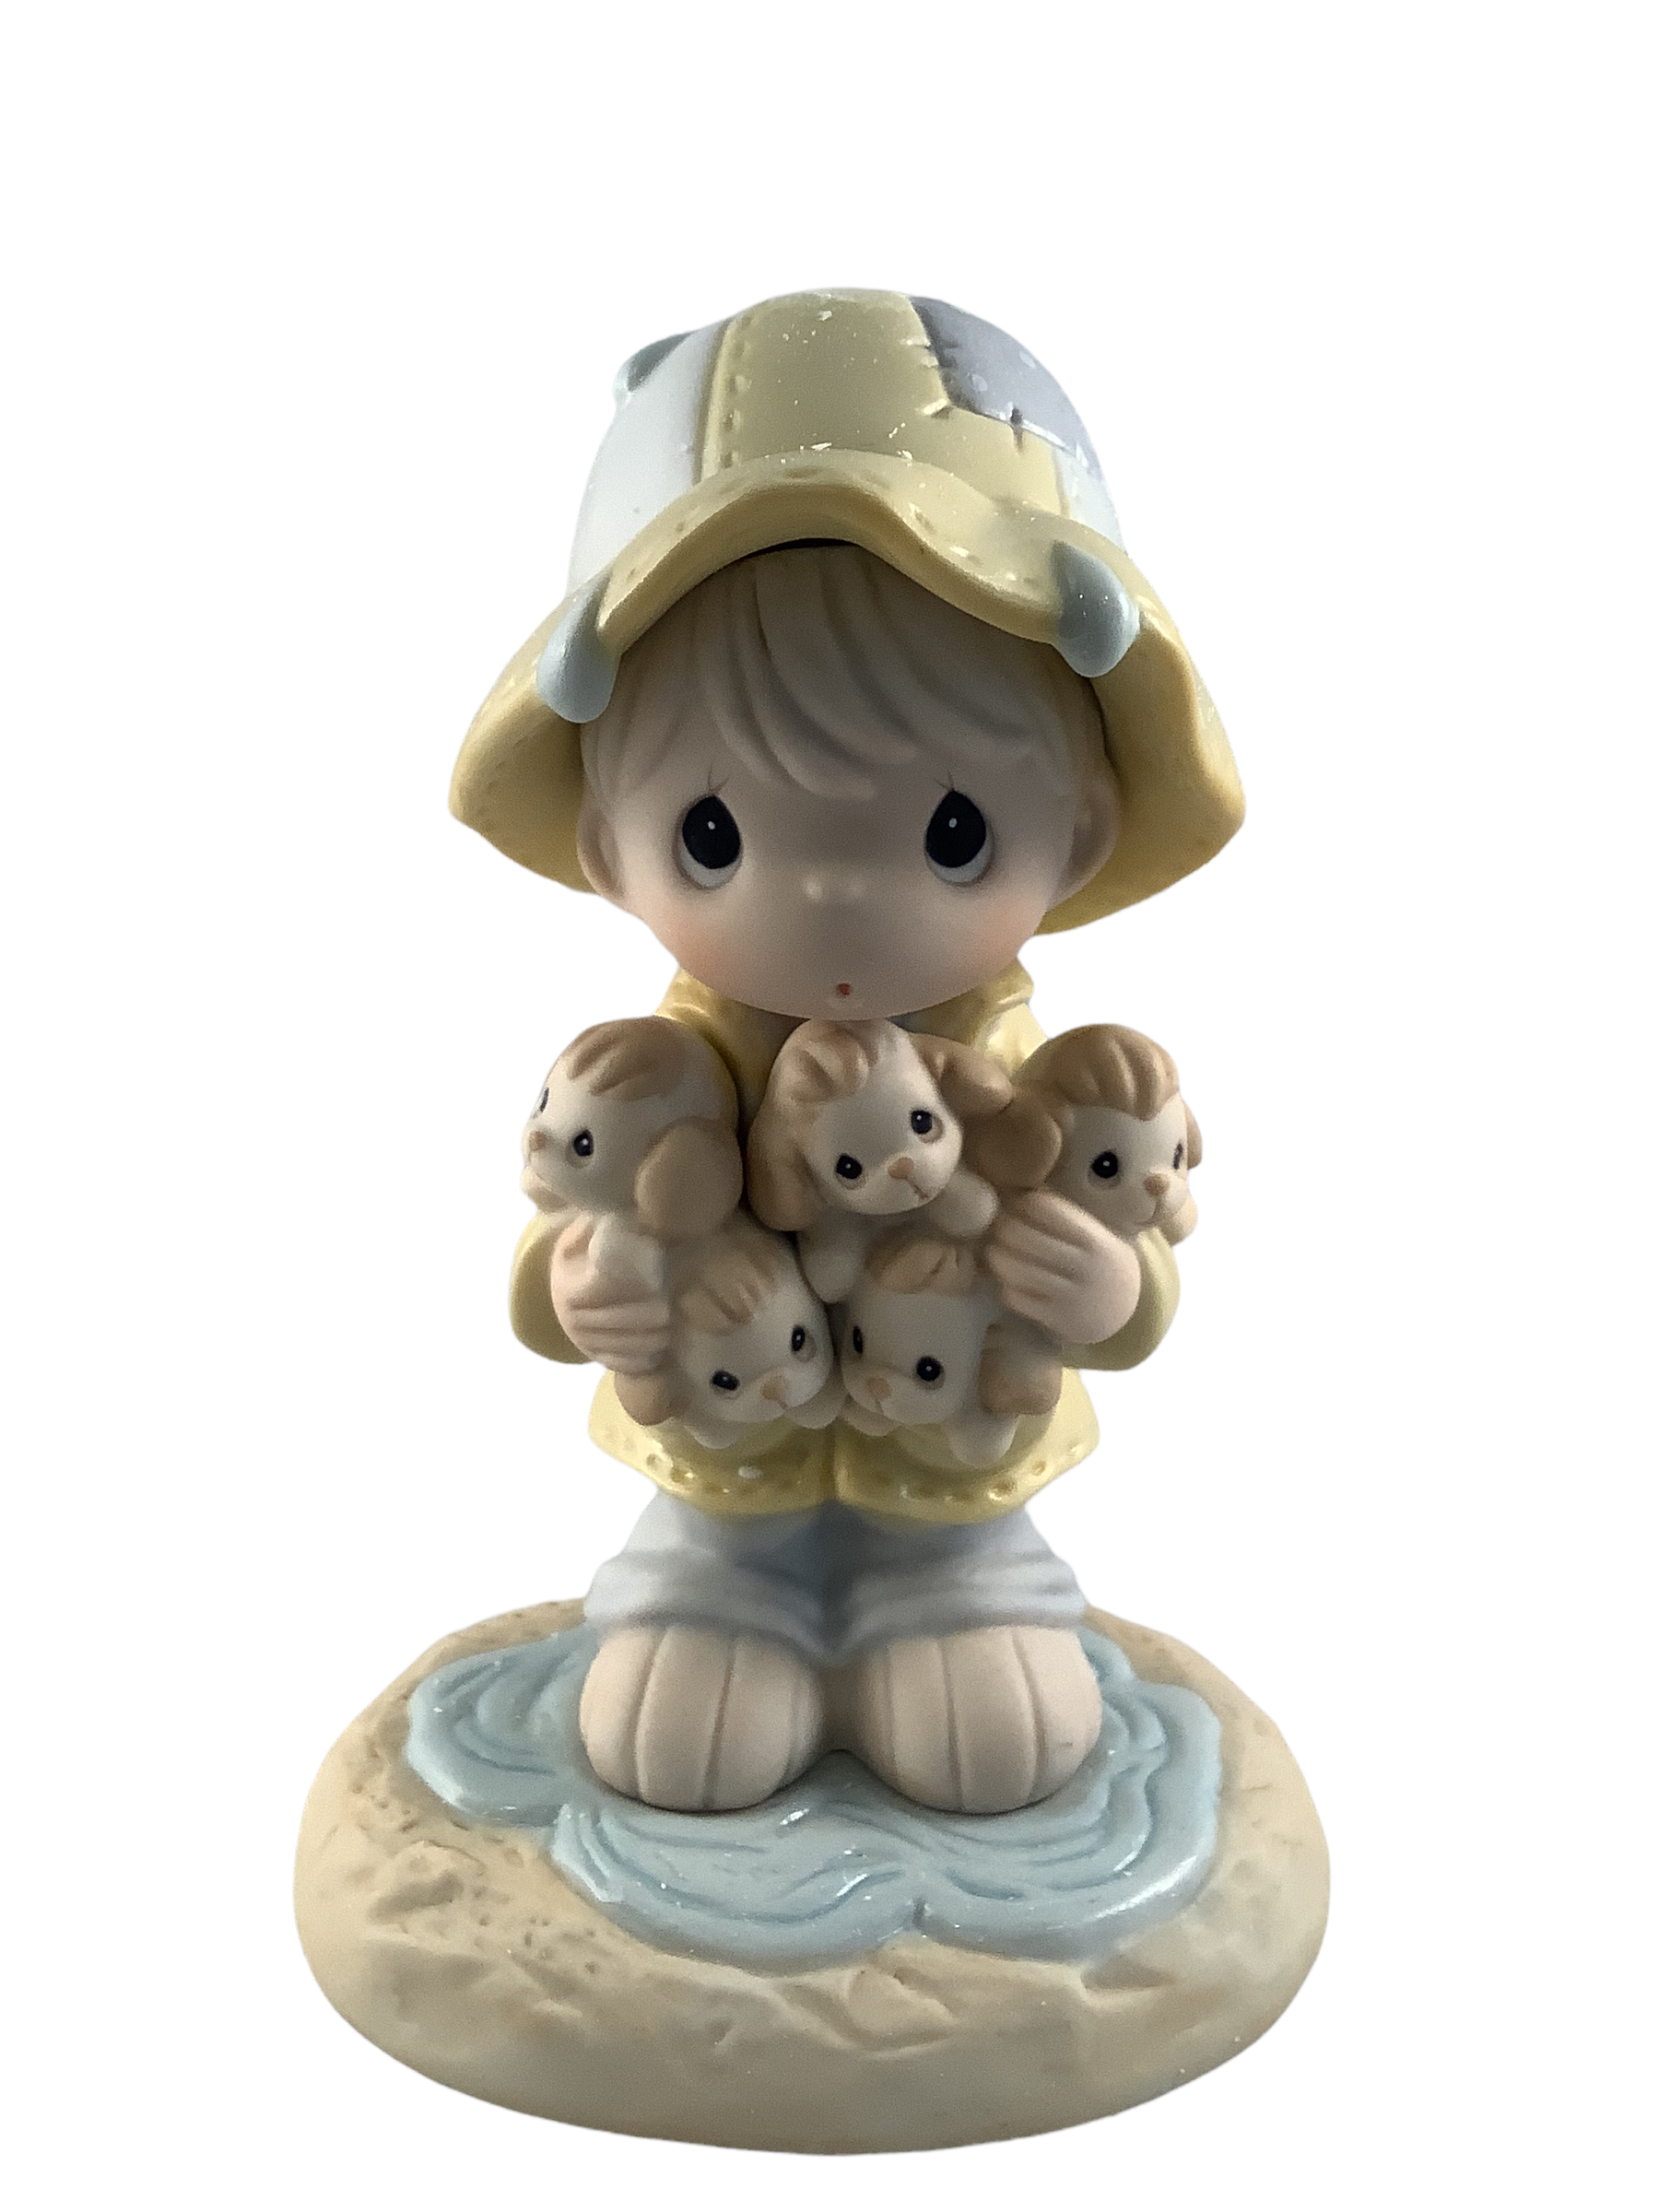 I'll Be Your Shelter In The Storm - Precious Moment Figurine